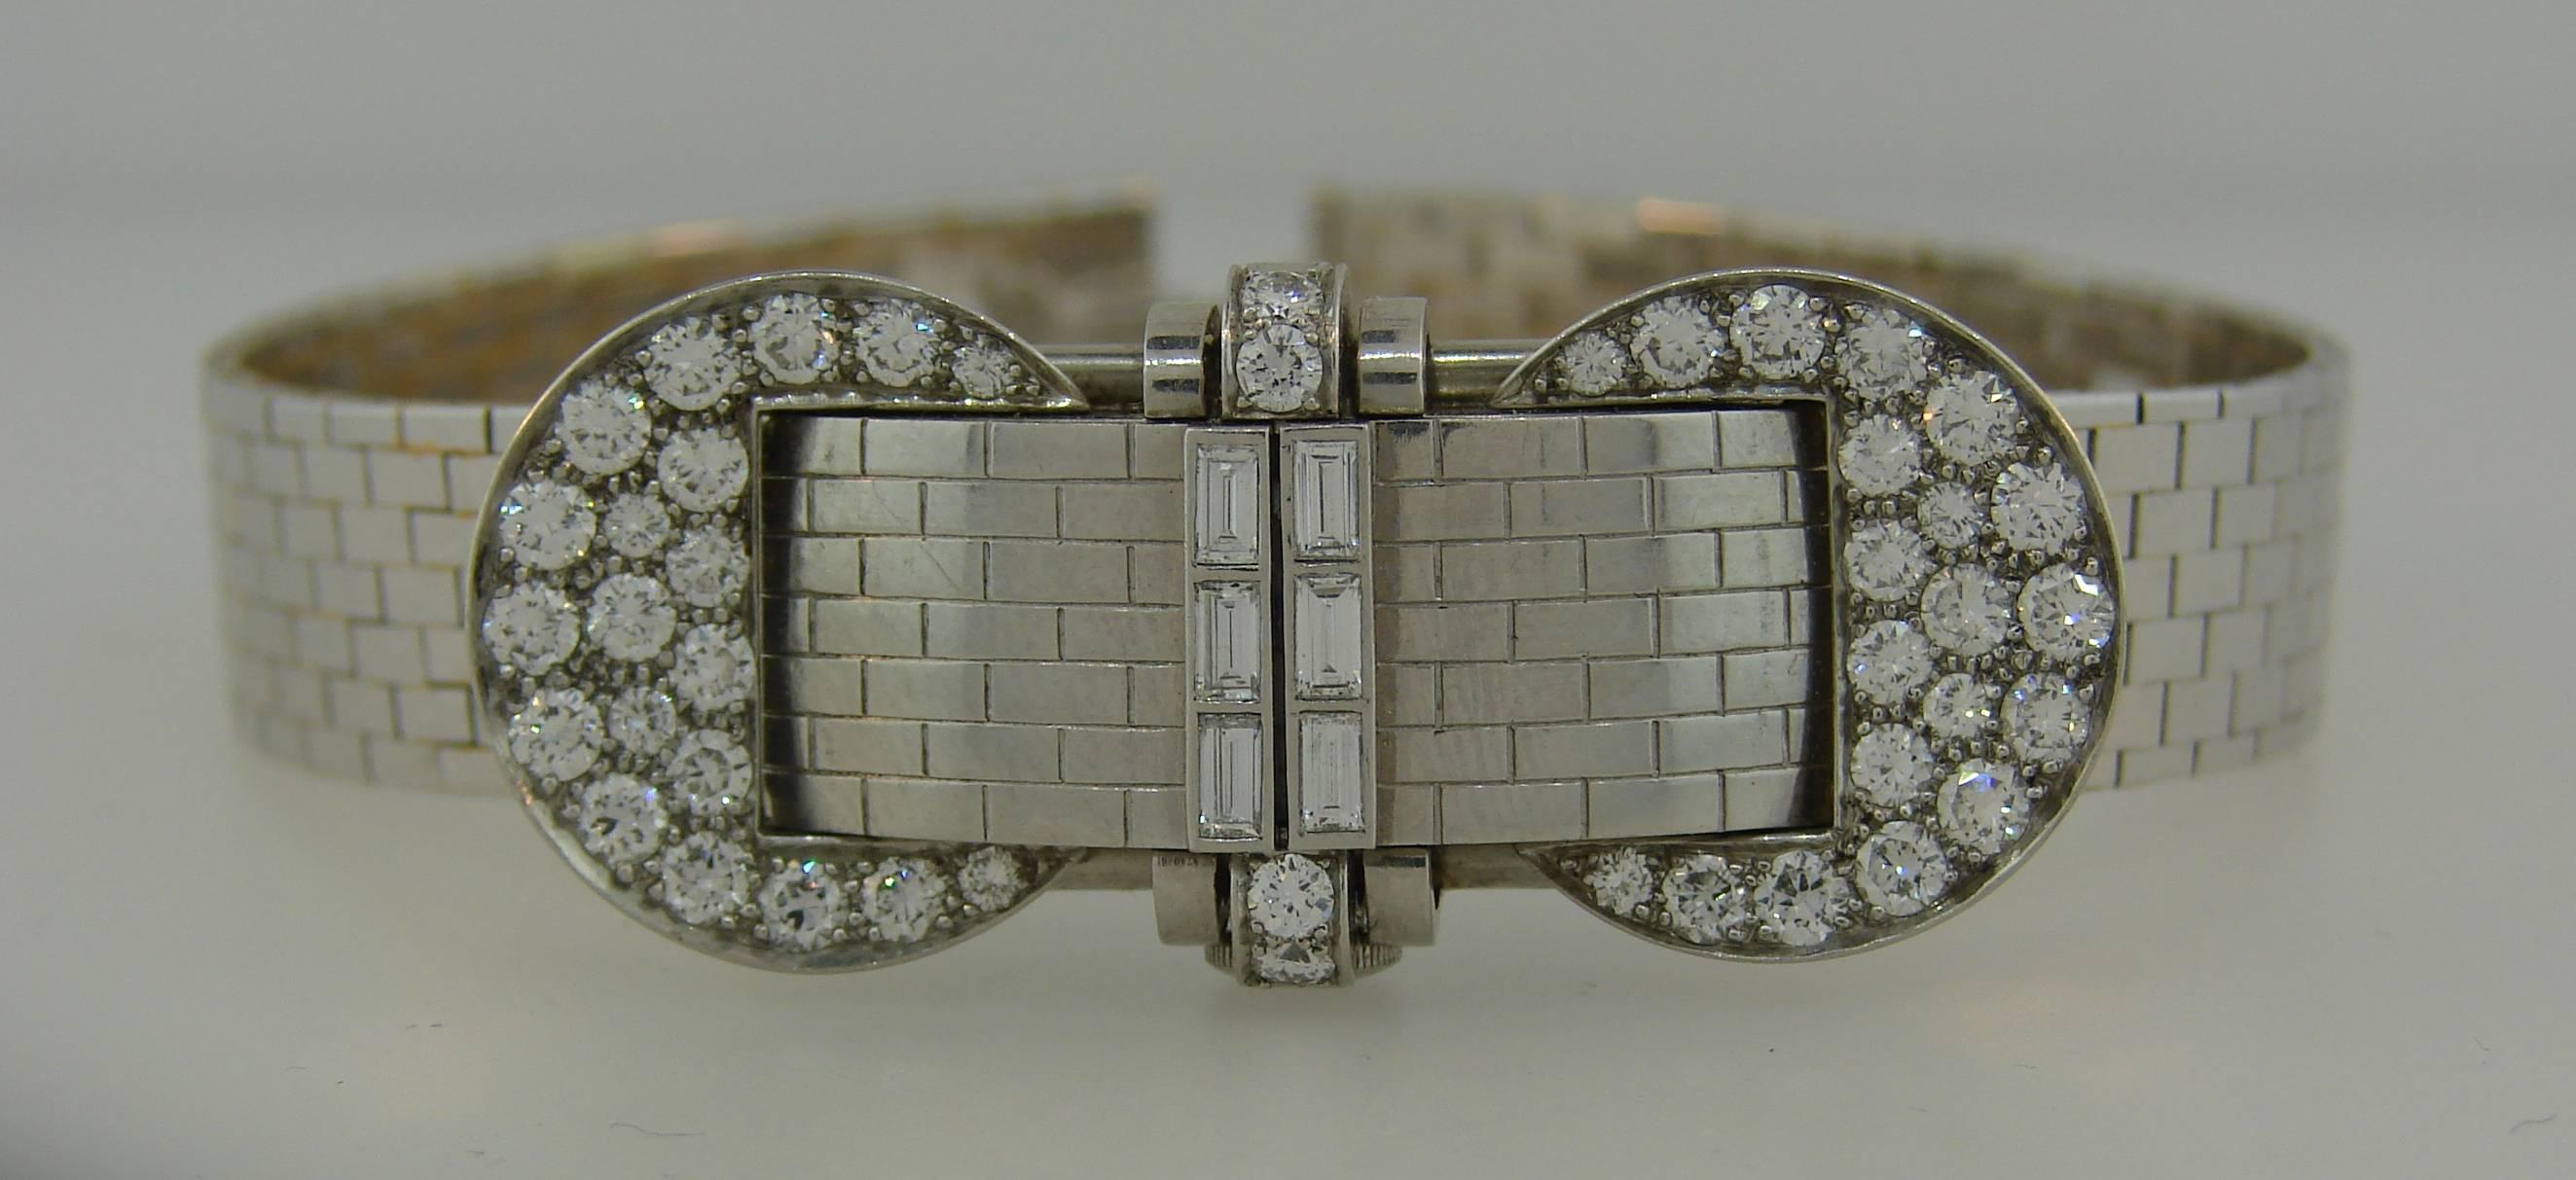 Elegant and feminine lady's watch bracelet created by Van Cleef & Arpels in New York in the 1940's. 
The watch case is made of platinum and set with transitional round full cut diamonds and baguette cut diamonds (F-G color, VS1 clarity, total